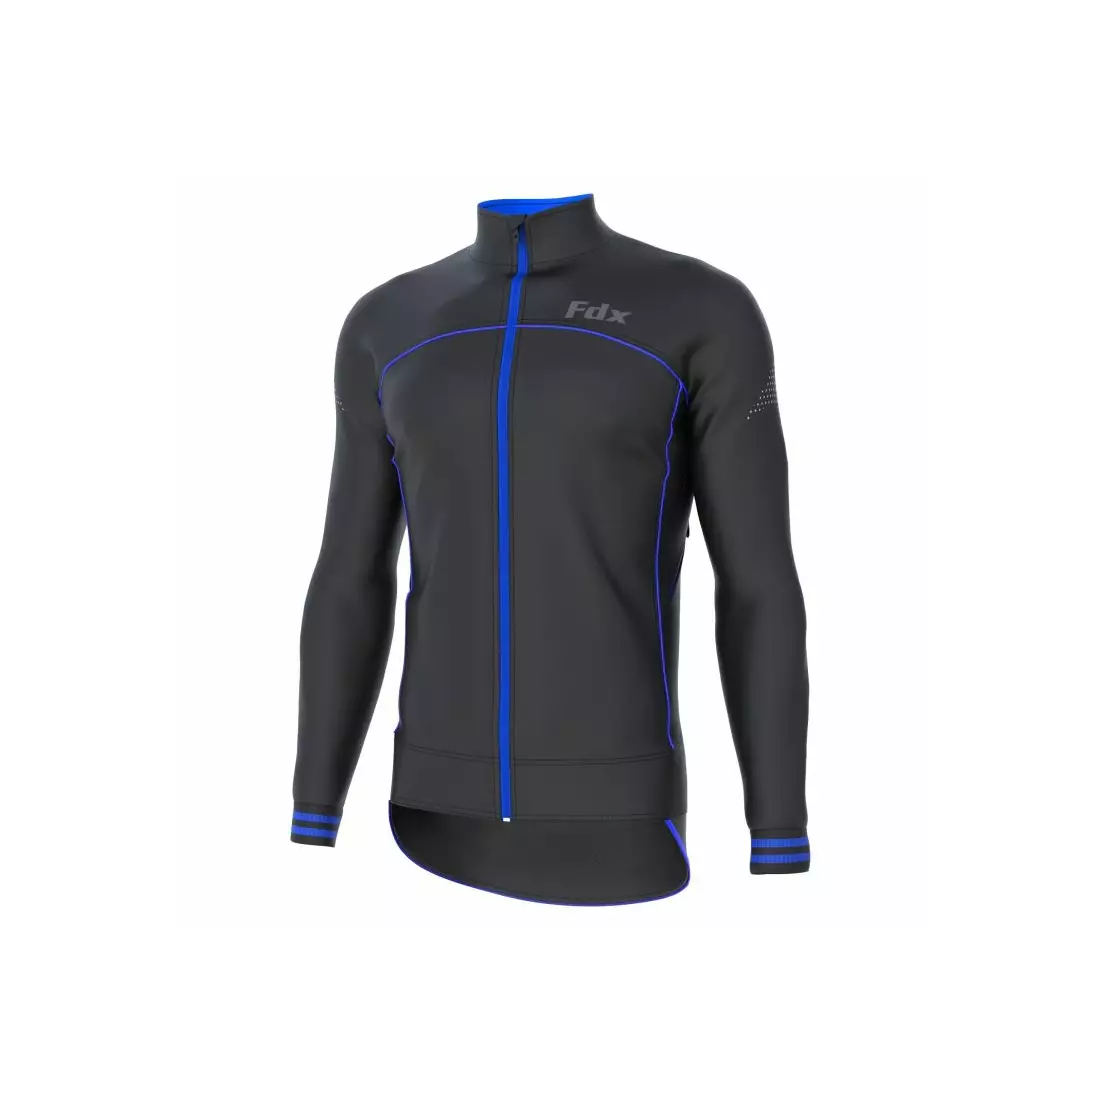 FDX 1310 men's insulated cycling jacket black and blue